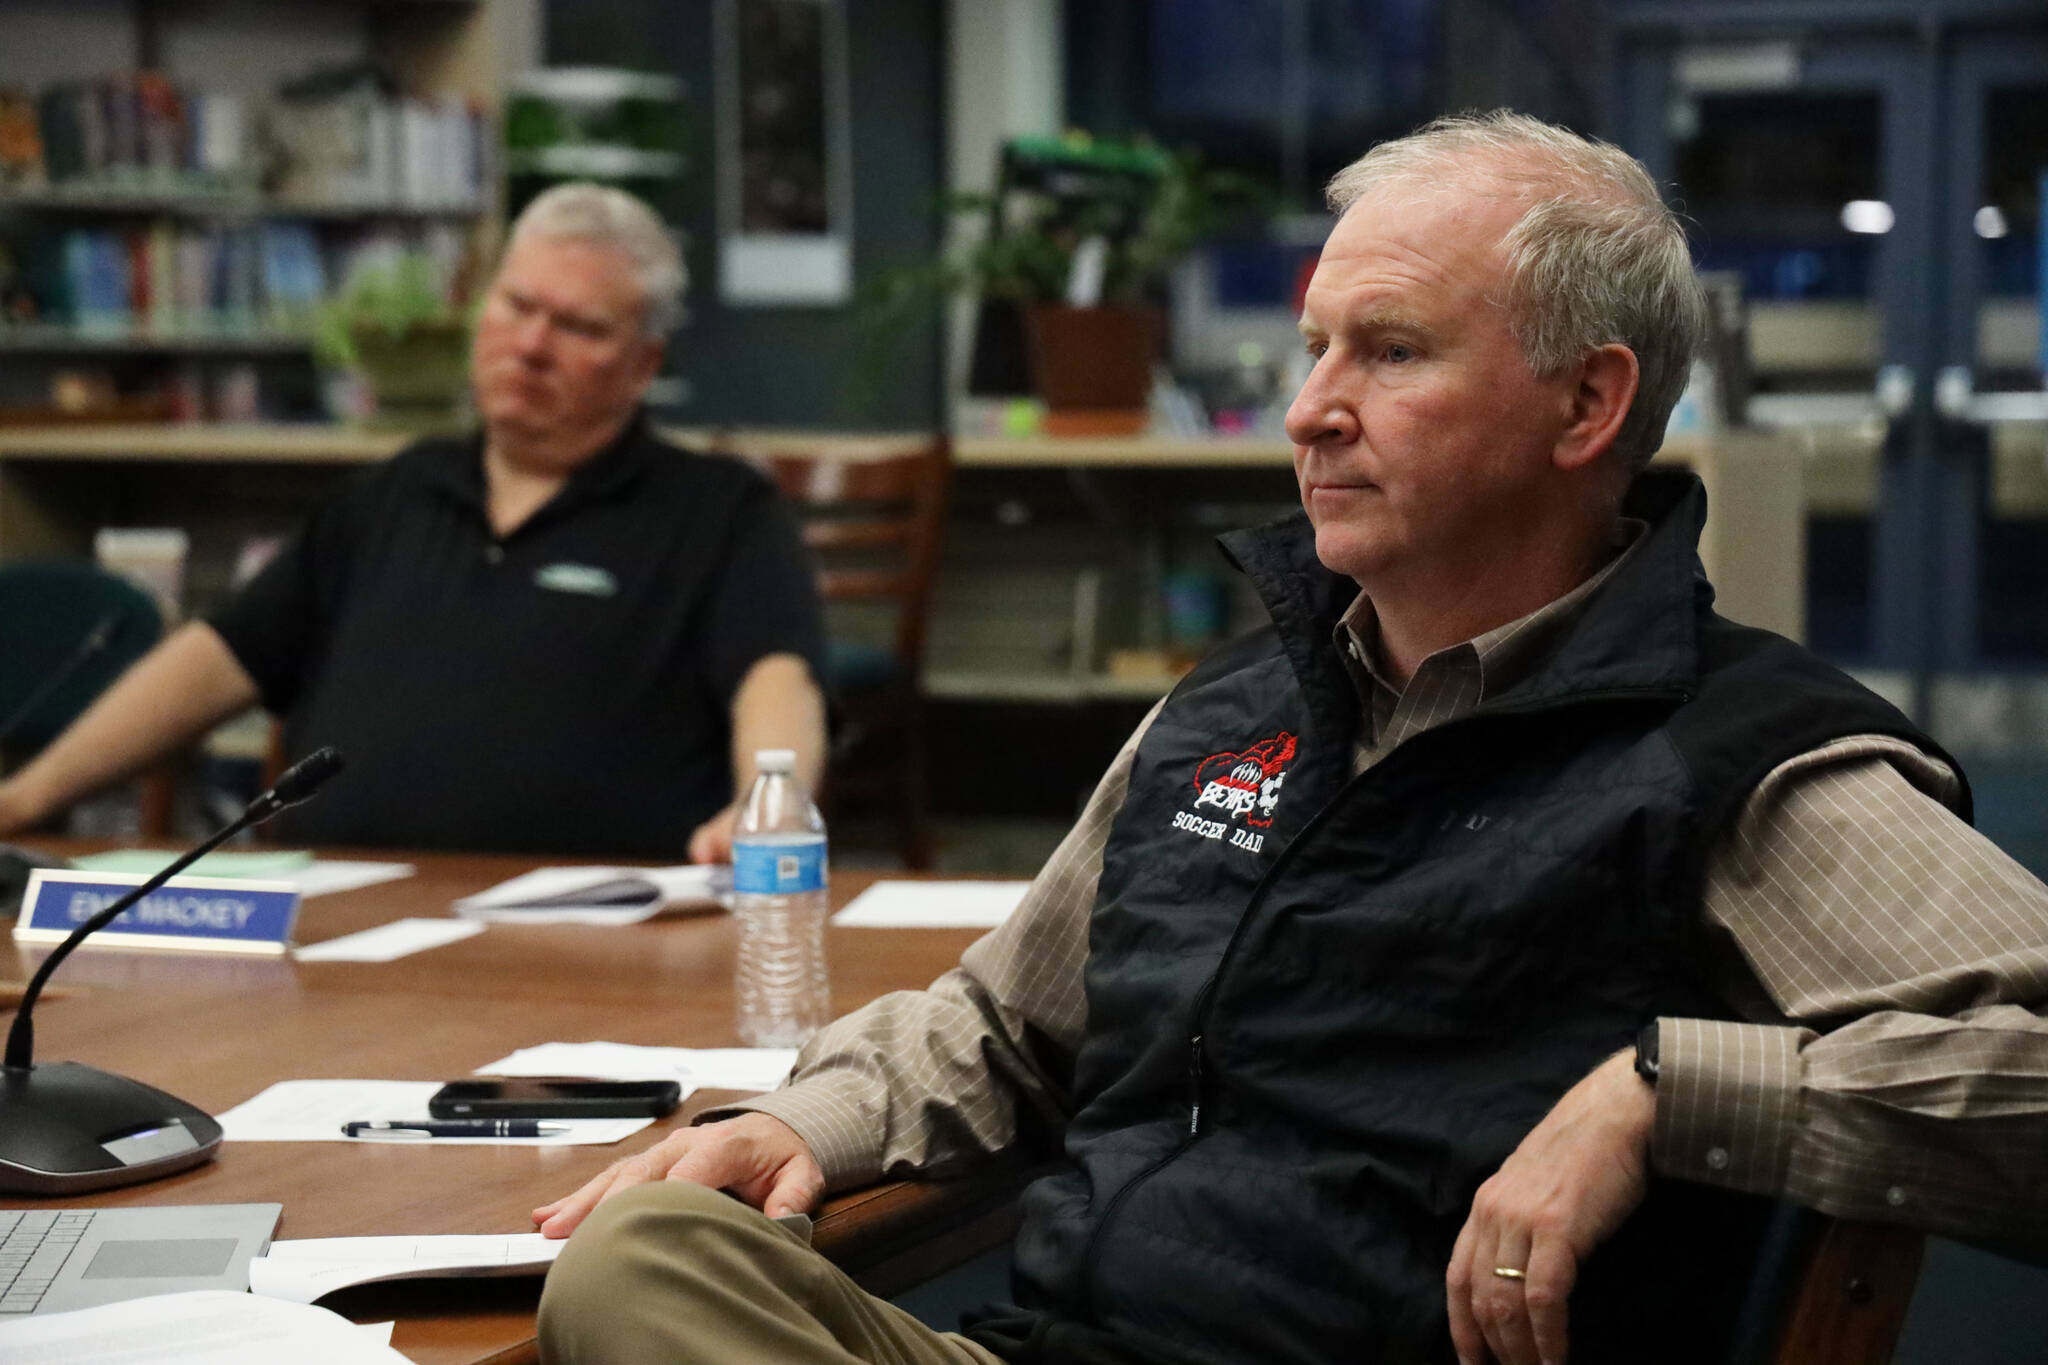 Longtime Juneau Board of Education member Brian Holst listens during a board meeting in May. Holst rescinded his run for candidacy for a fourth term on the board late last week. (Clarise Larson / Juneau Empire File)